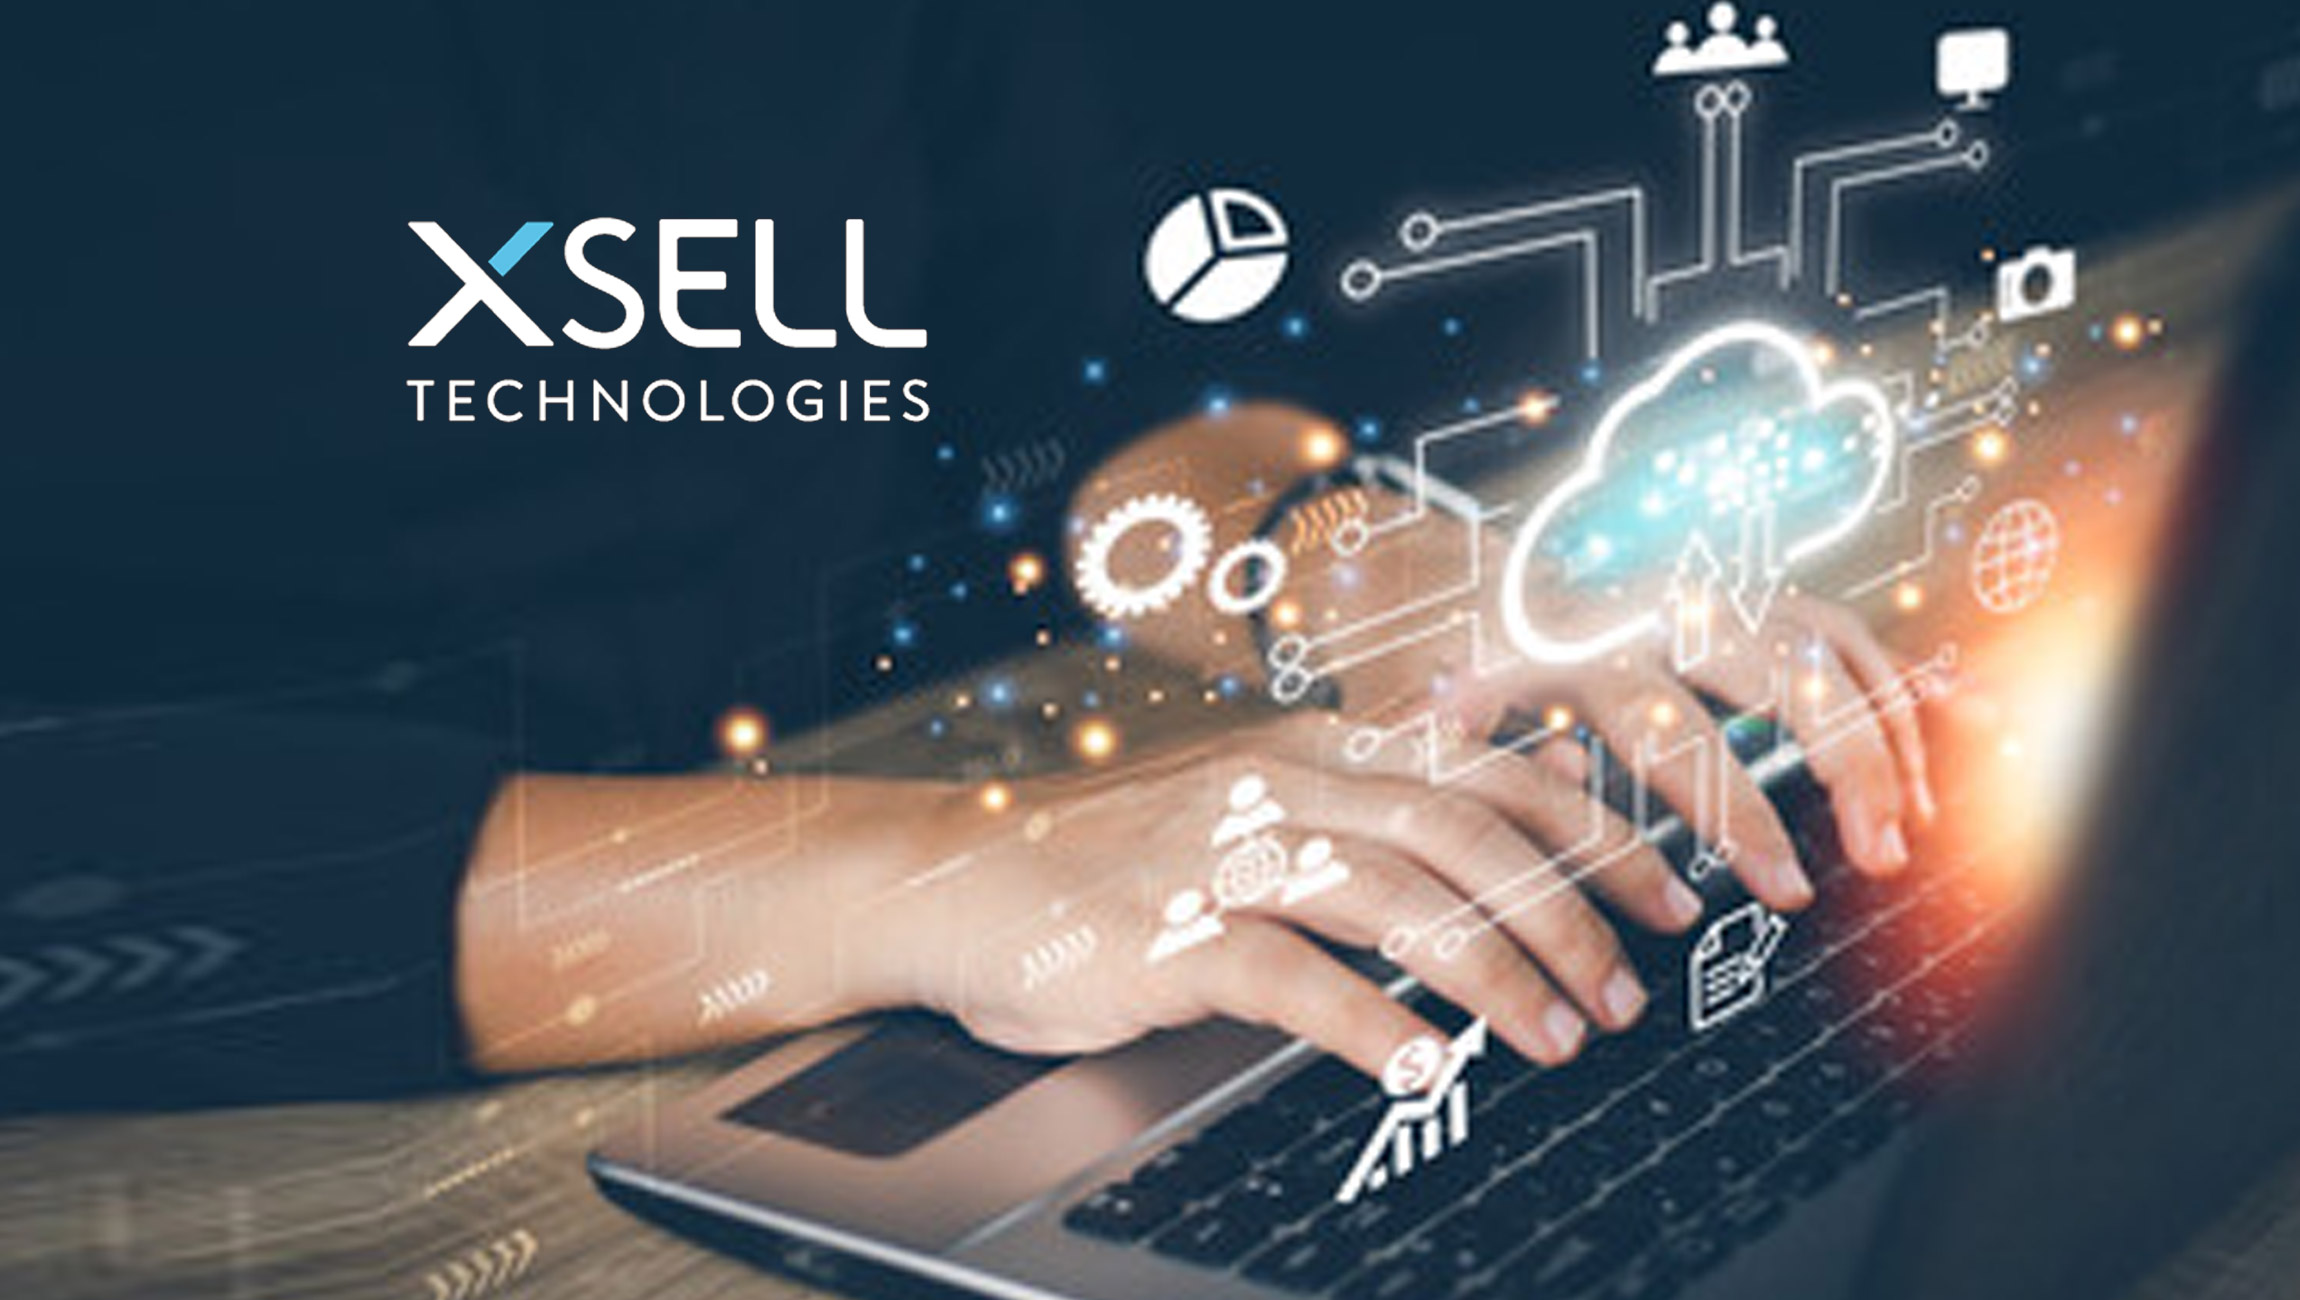 XSELL Technologies Receives ISO 27001 Certification for Security Management